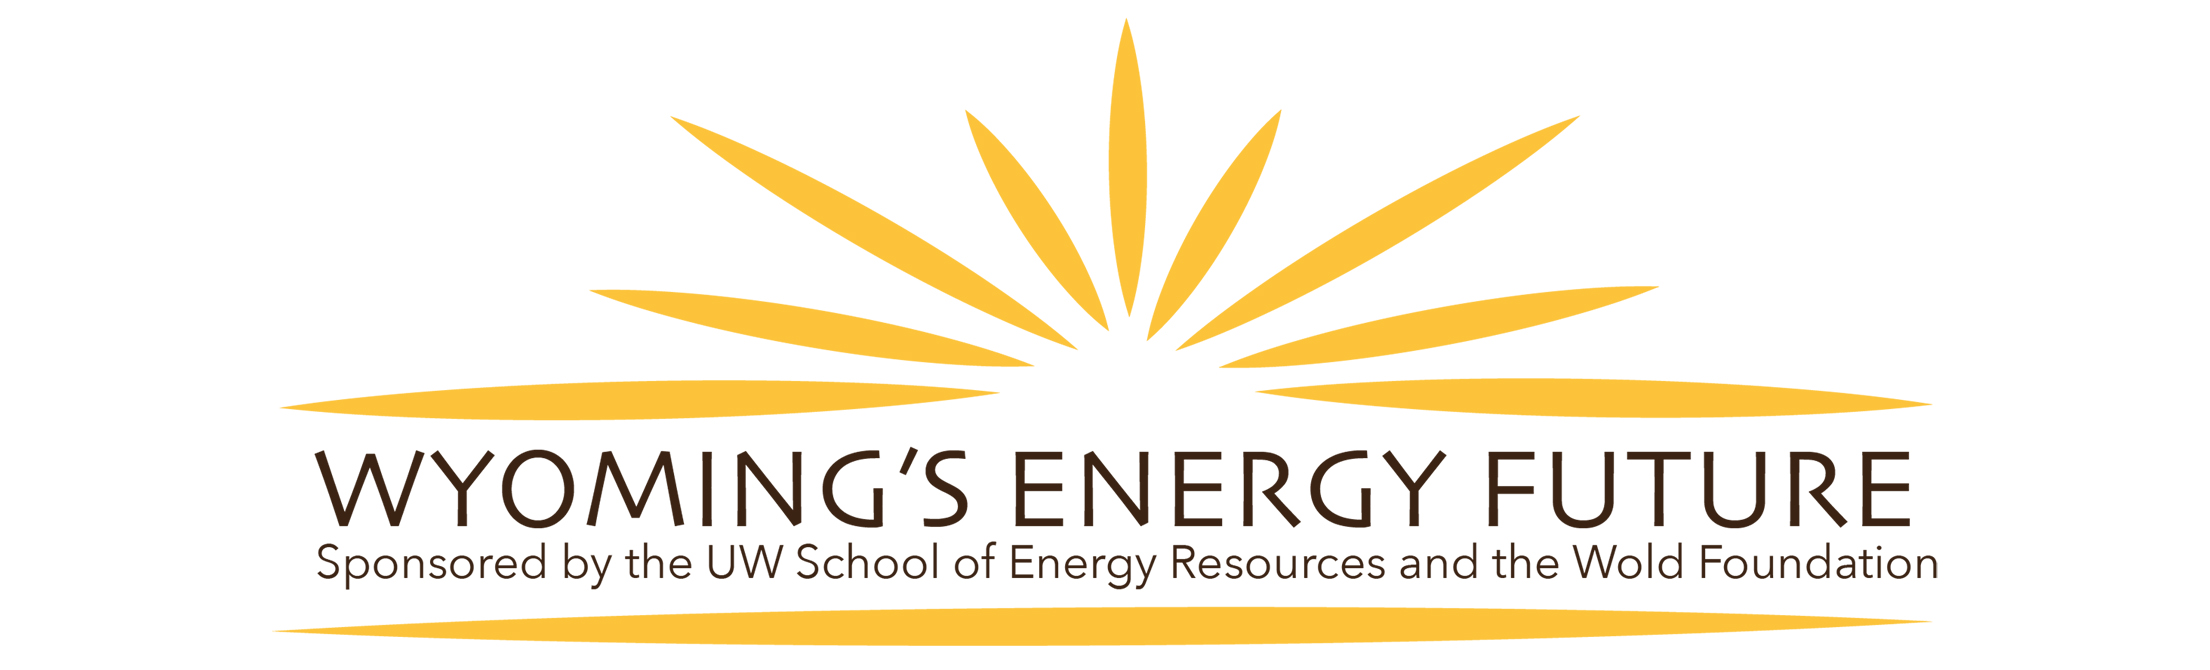 Wyoming's Energy Future Conference